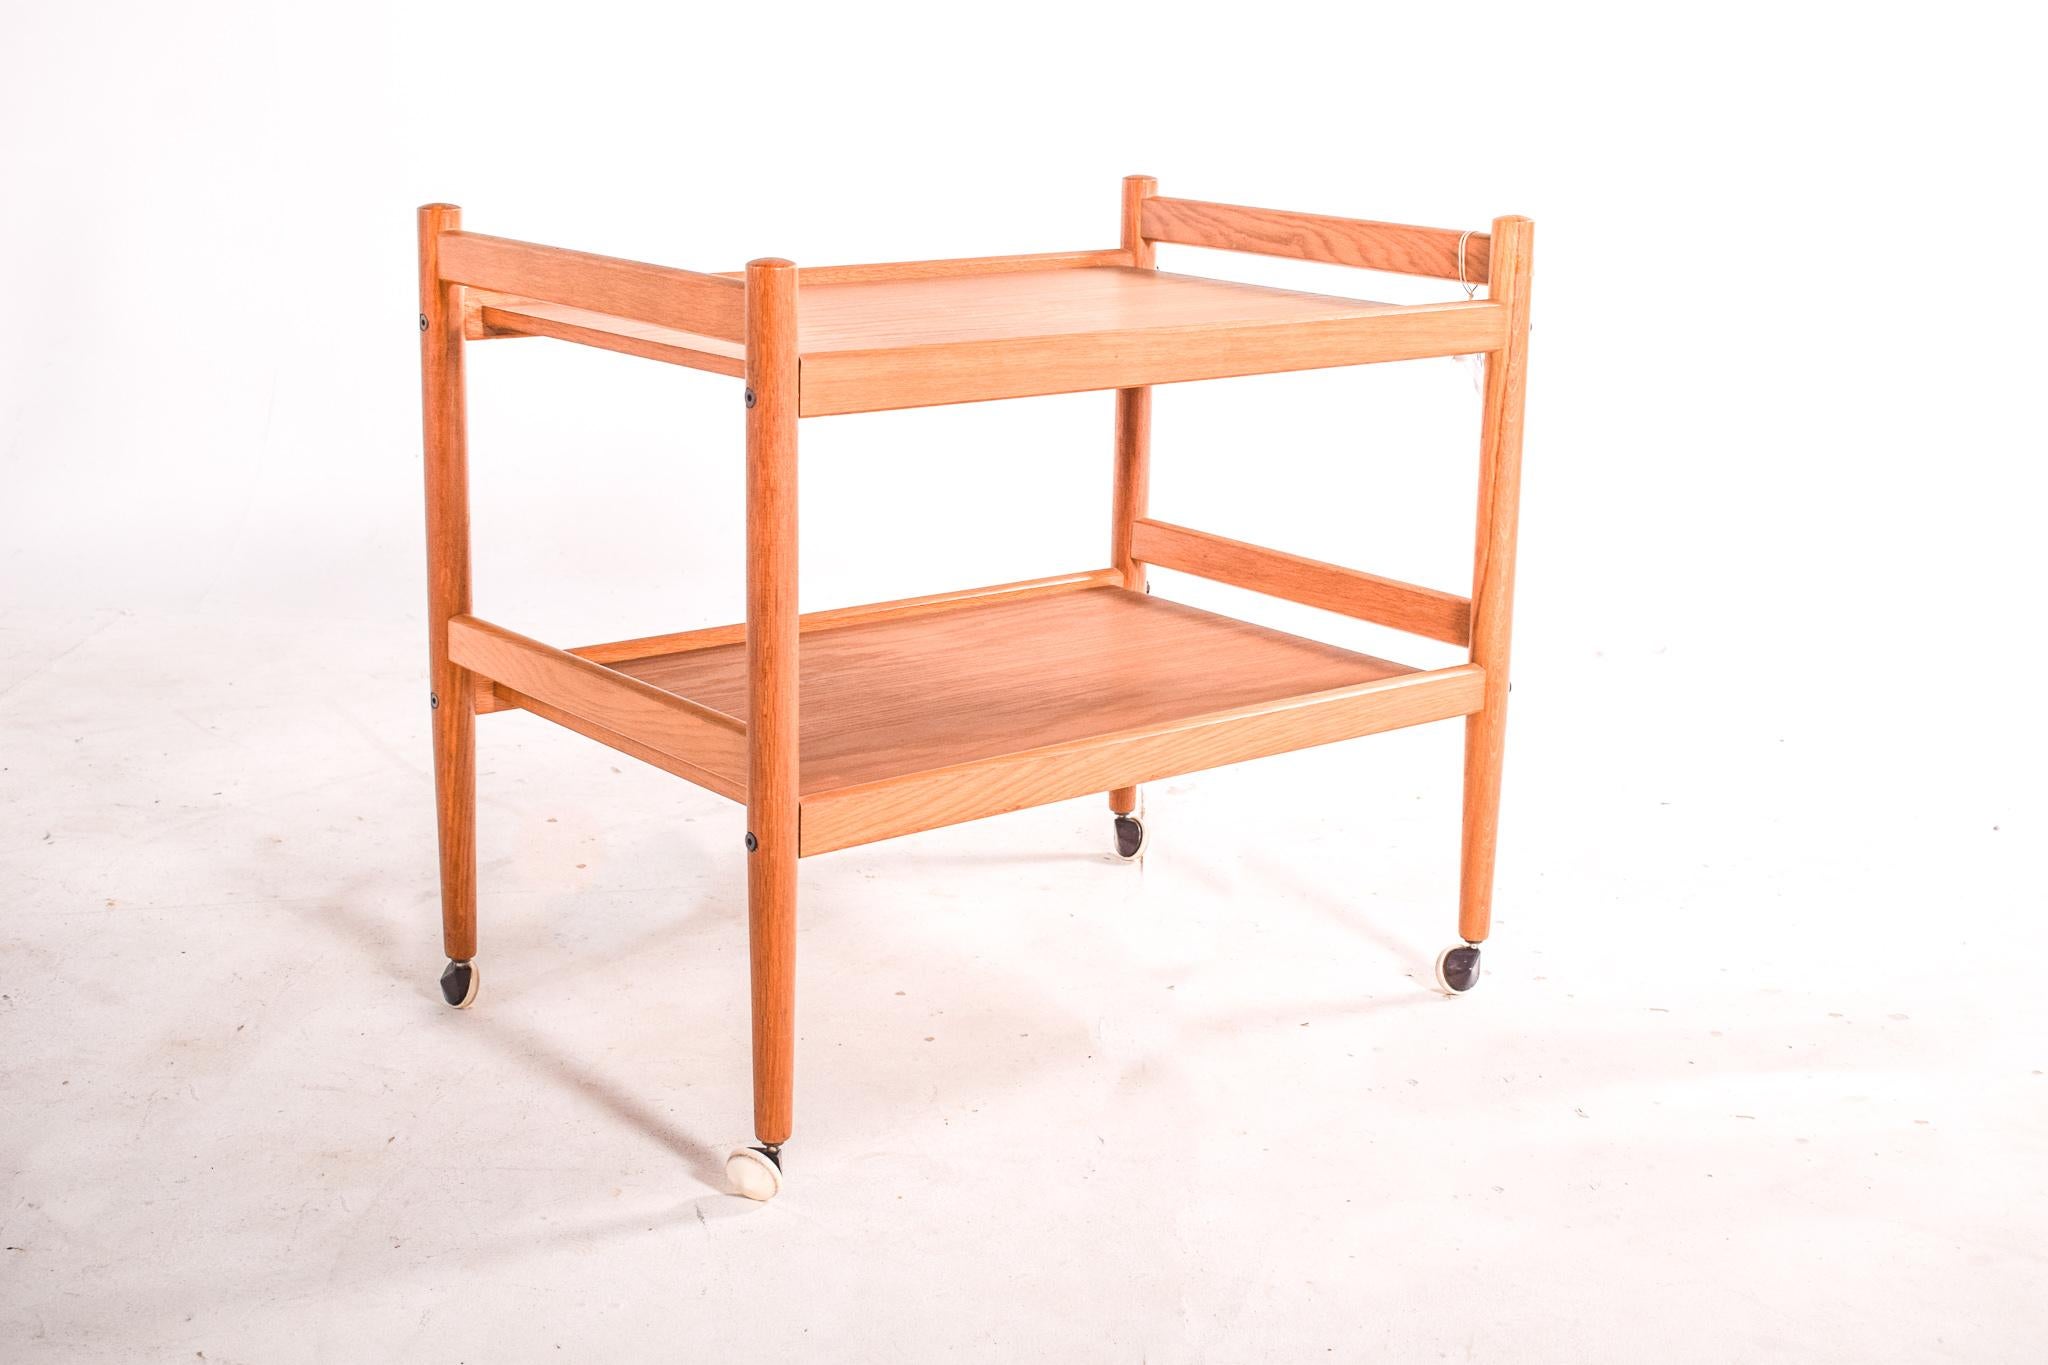 Midcentury oak bar cart/tea trolley produced in the 1950s. Original retro Danish Scandinavian style. This vintage original trolley hails from Denmark and is representative of the simplicity of Danish design. Crafted in solid and veener oak wood.